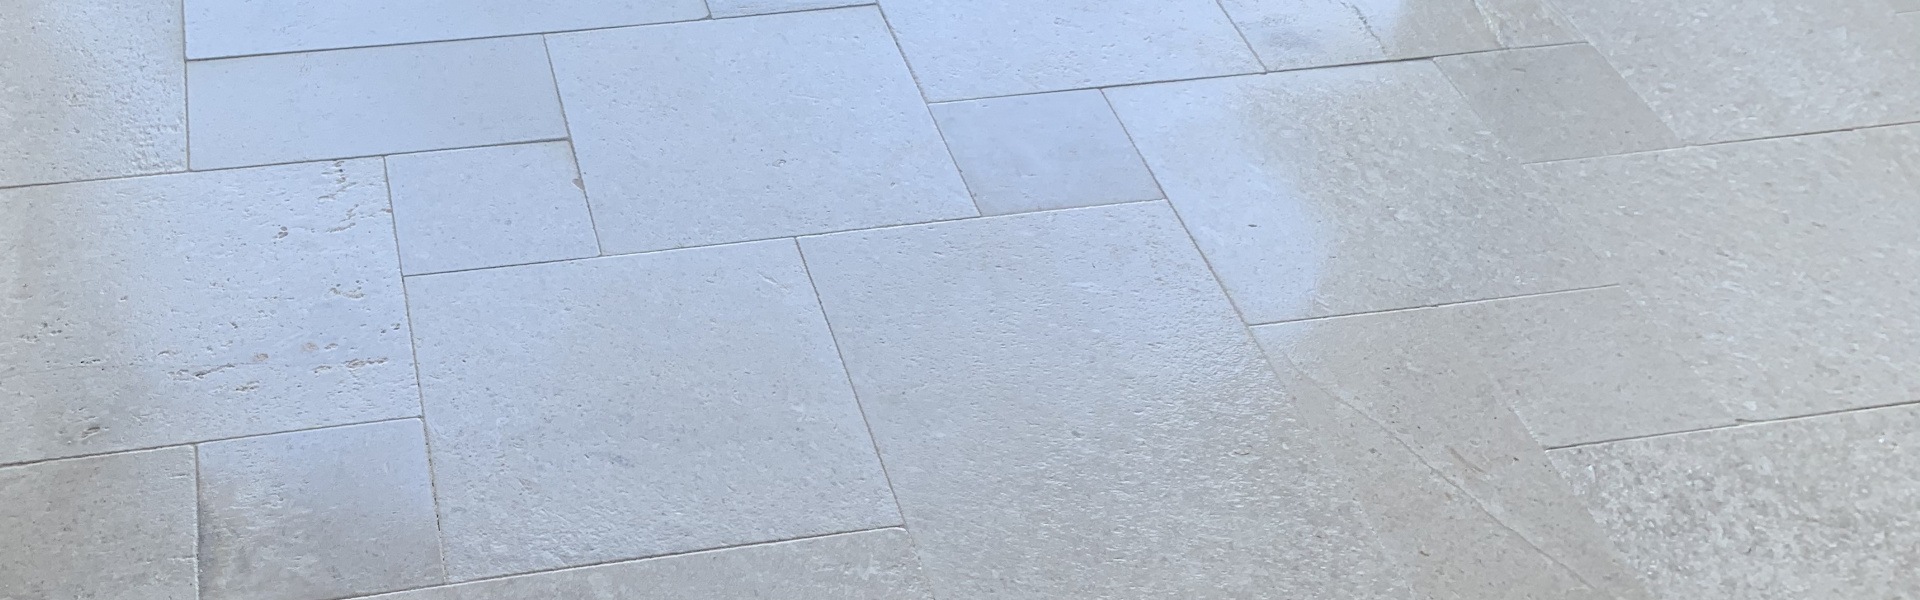 How to Clean Travertine Floors Naturally: Tips and Tricks